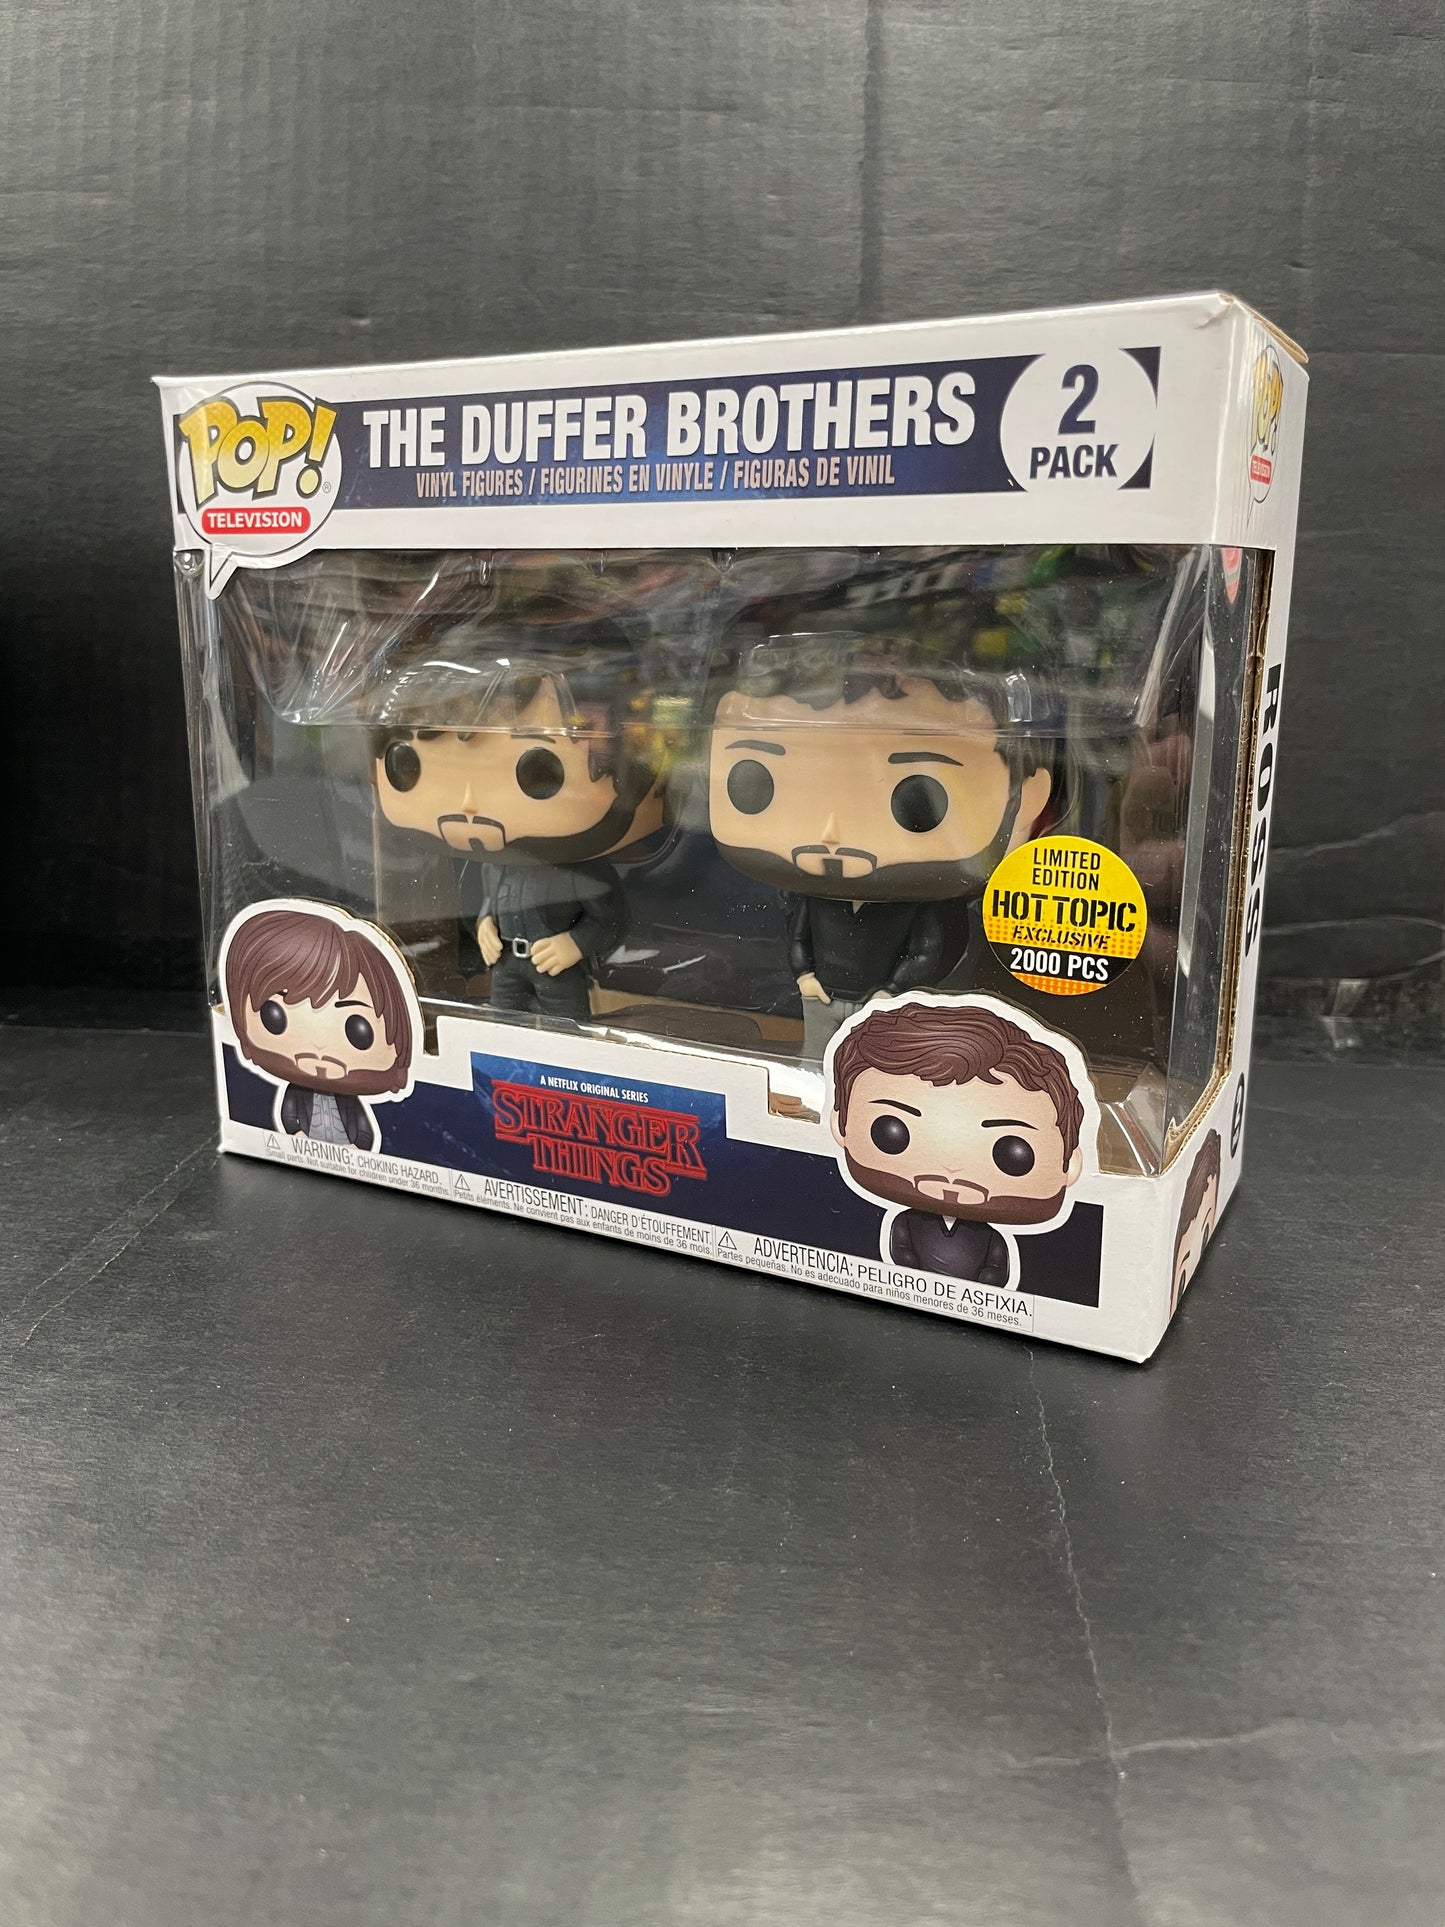 Funko Pop! Television Stranger Things The Duffer Brothers 2 Pack Hot Topic Exclusive Limited 2000 PCS (Grade B)